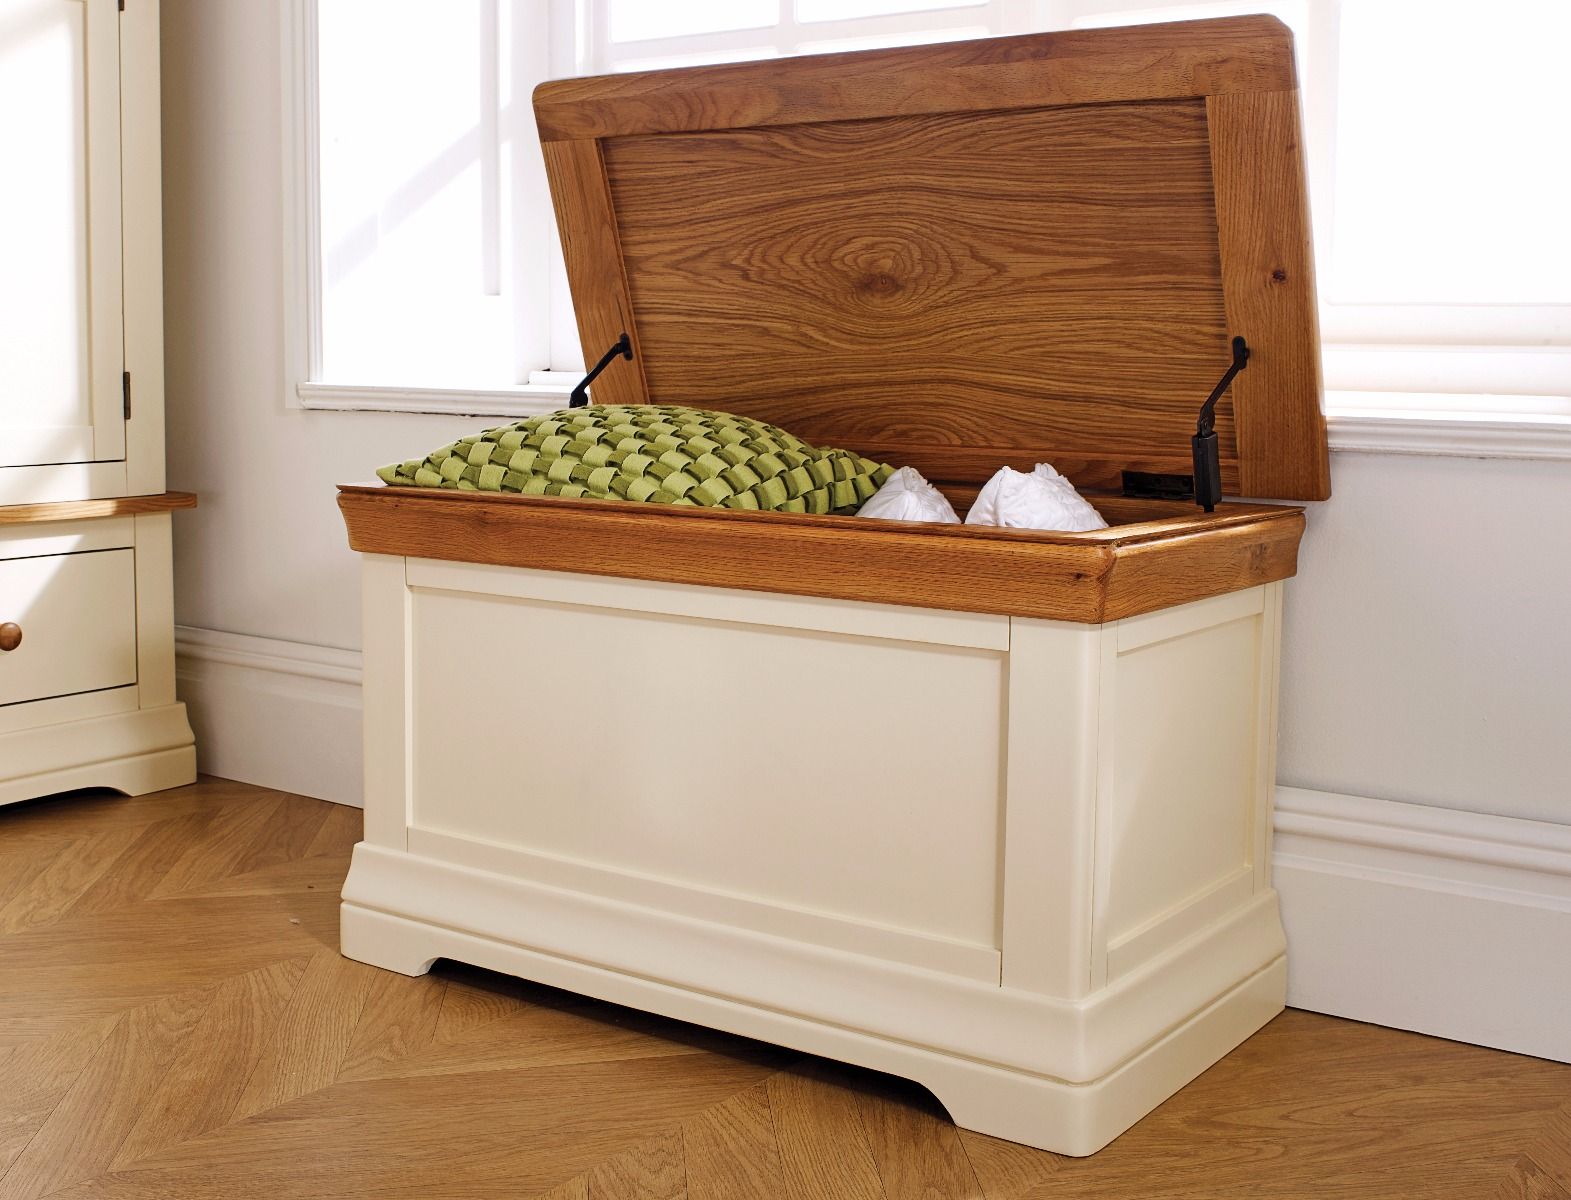 Farmhouse Country Oak Cream Painted Storage Blanket Box - 10% OFF CODE SAVE